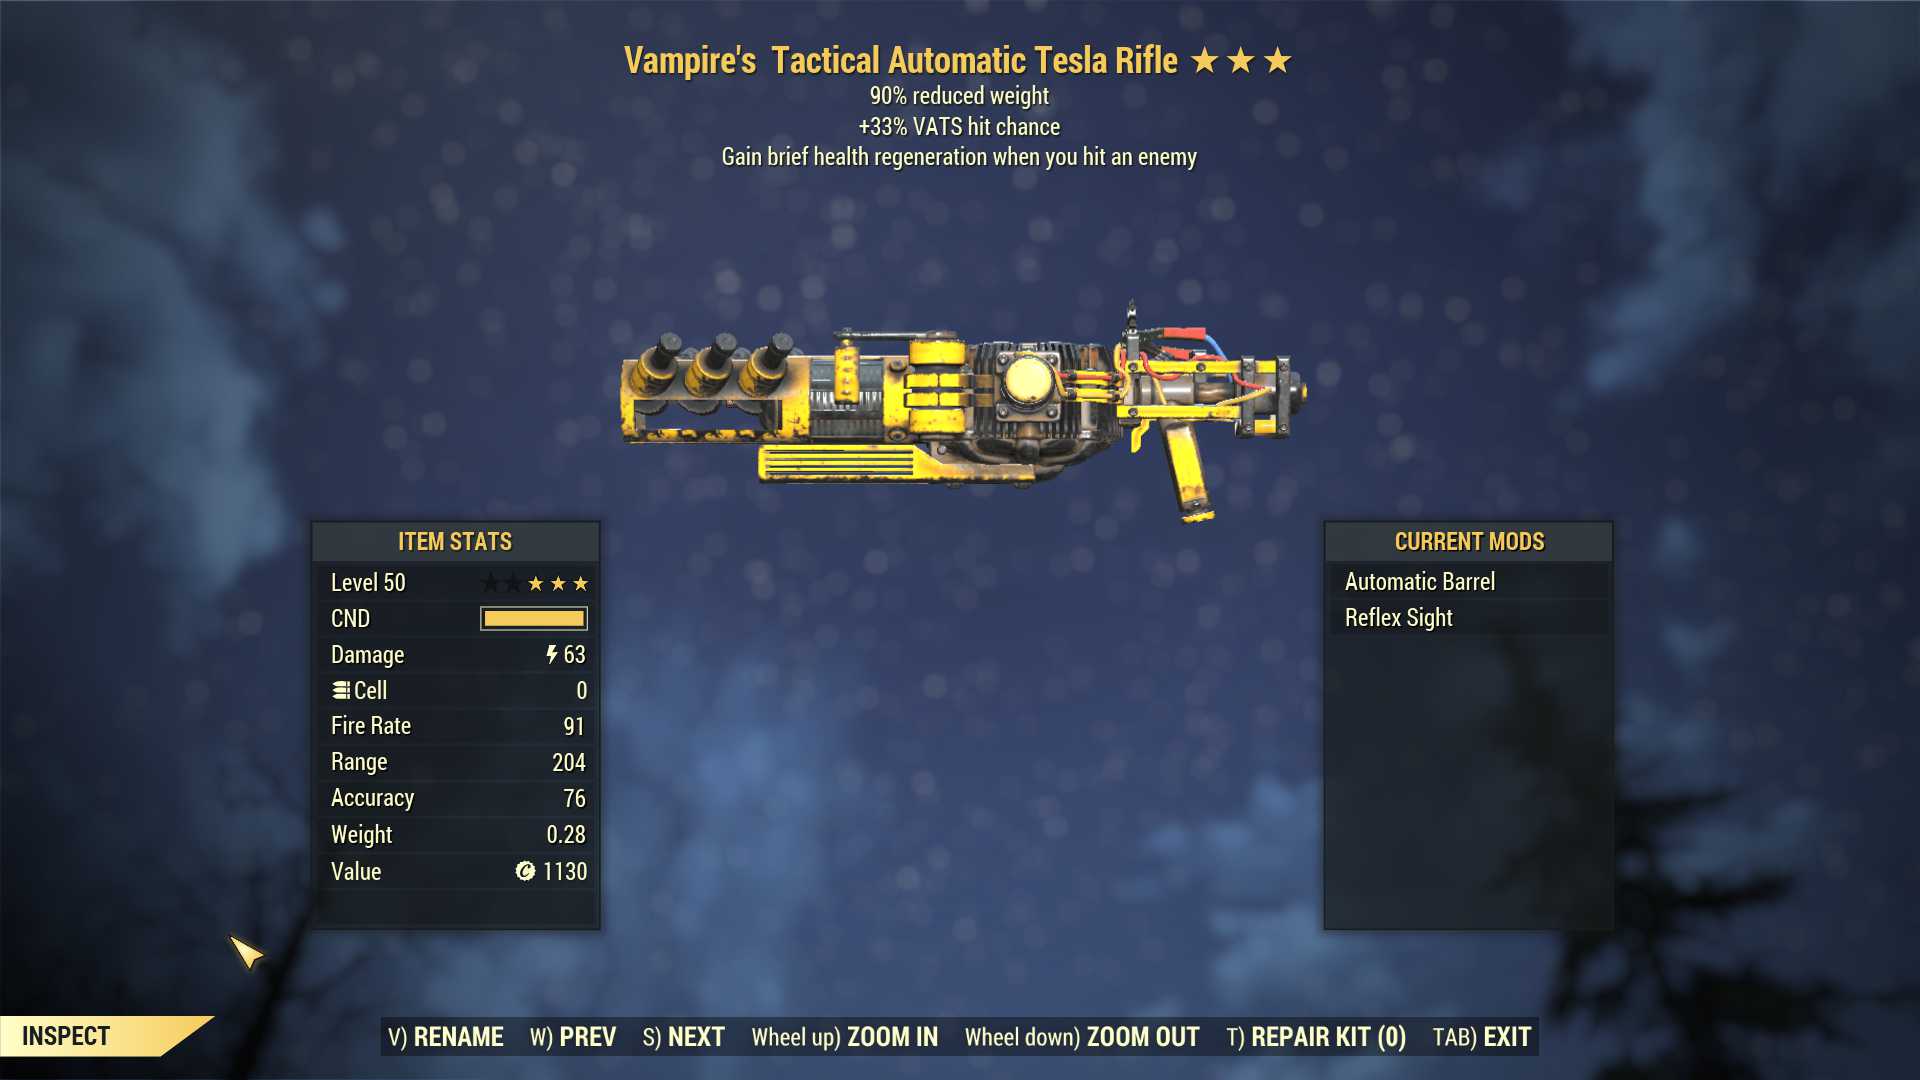 Vampire's Tesla rifle (+50% VATS hit chance, 90% reduced weight)